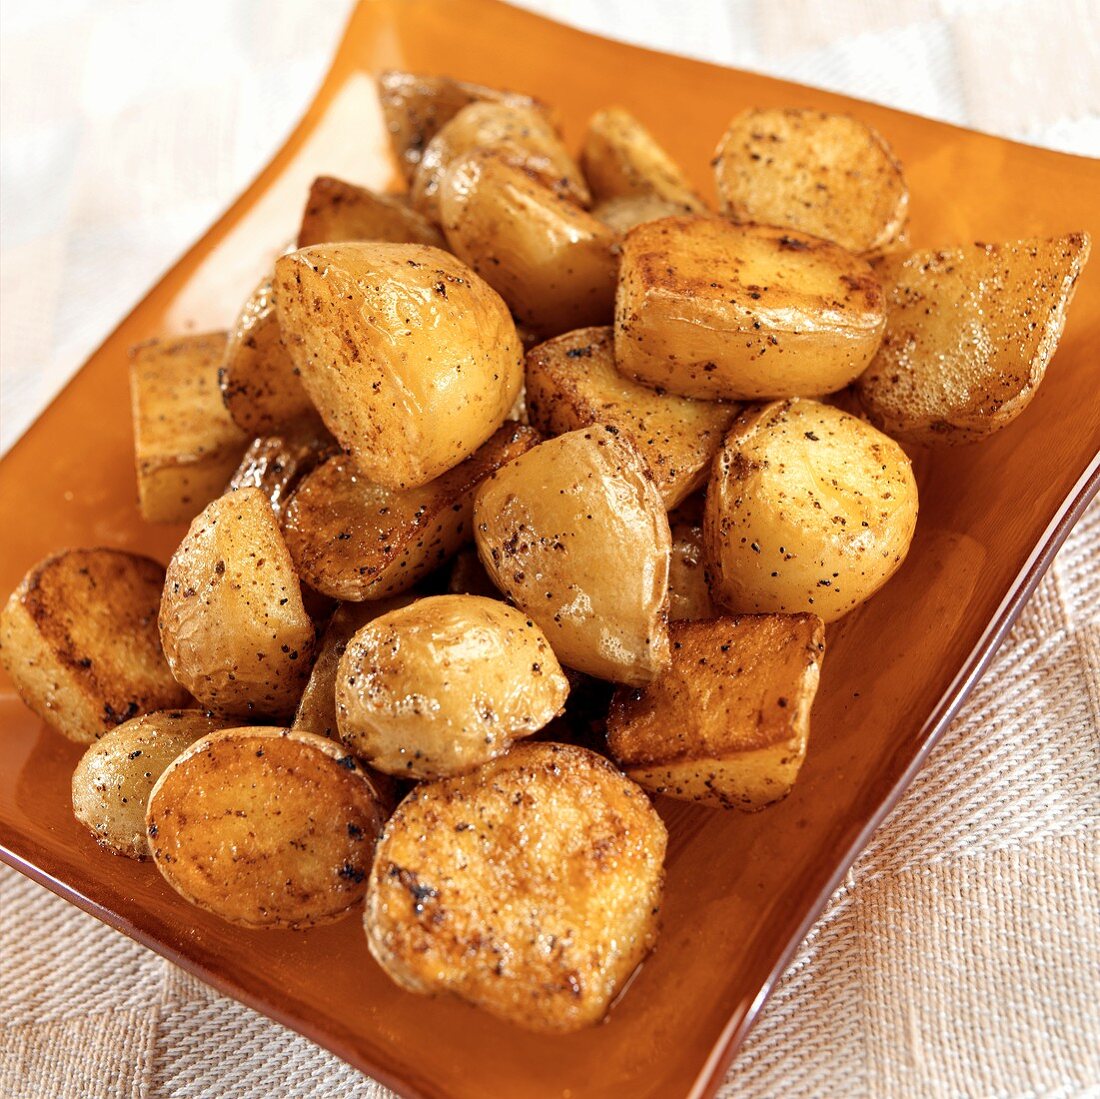 Small Yukon Gold potatoes, fried in butter and oil